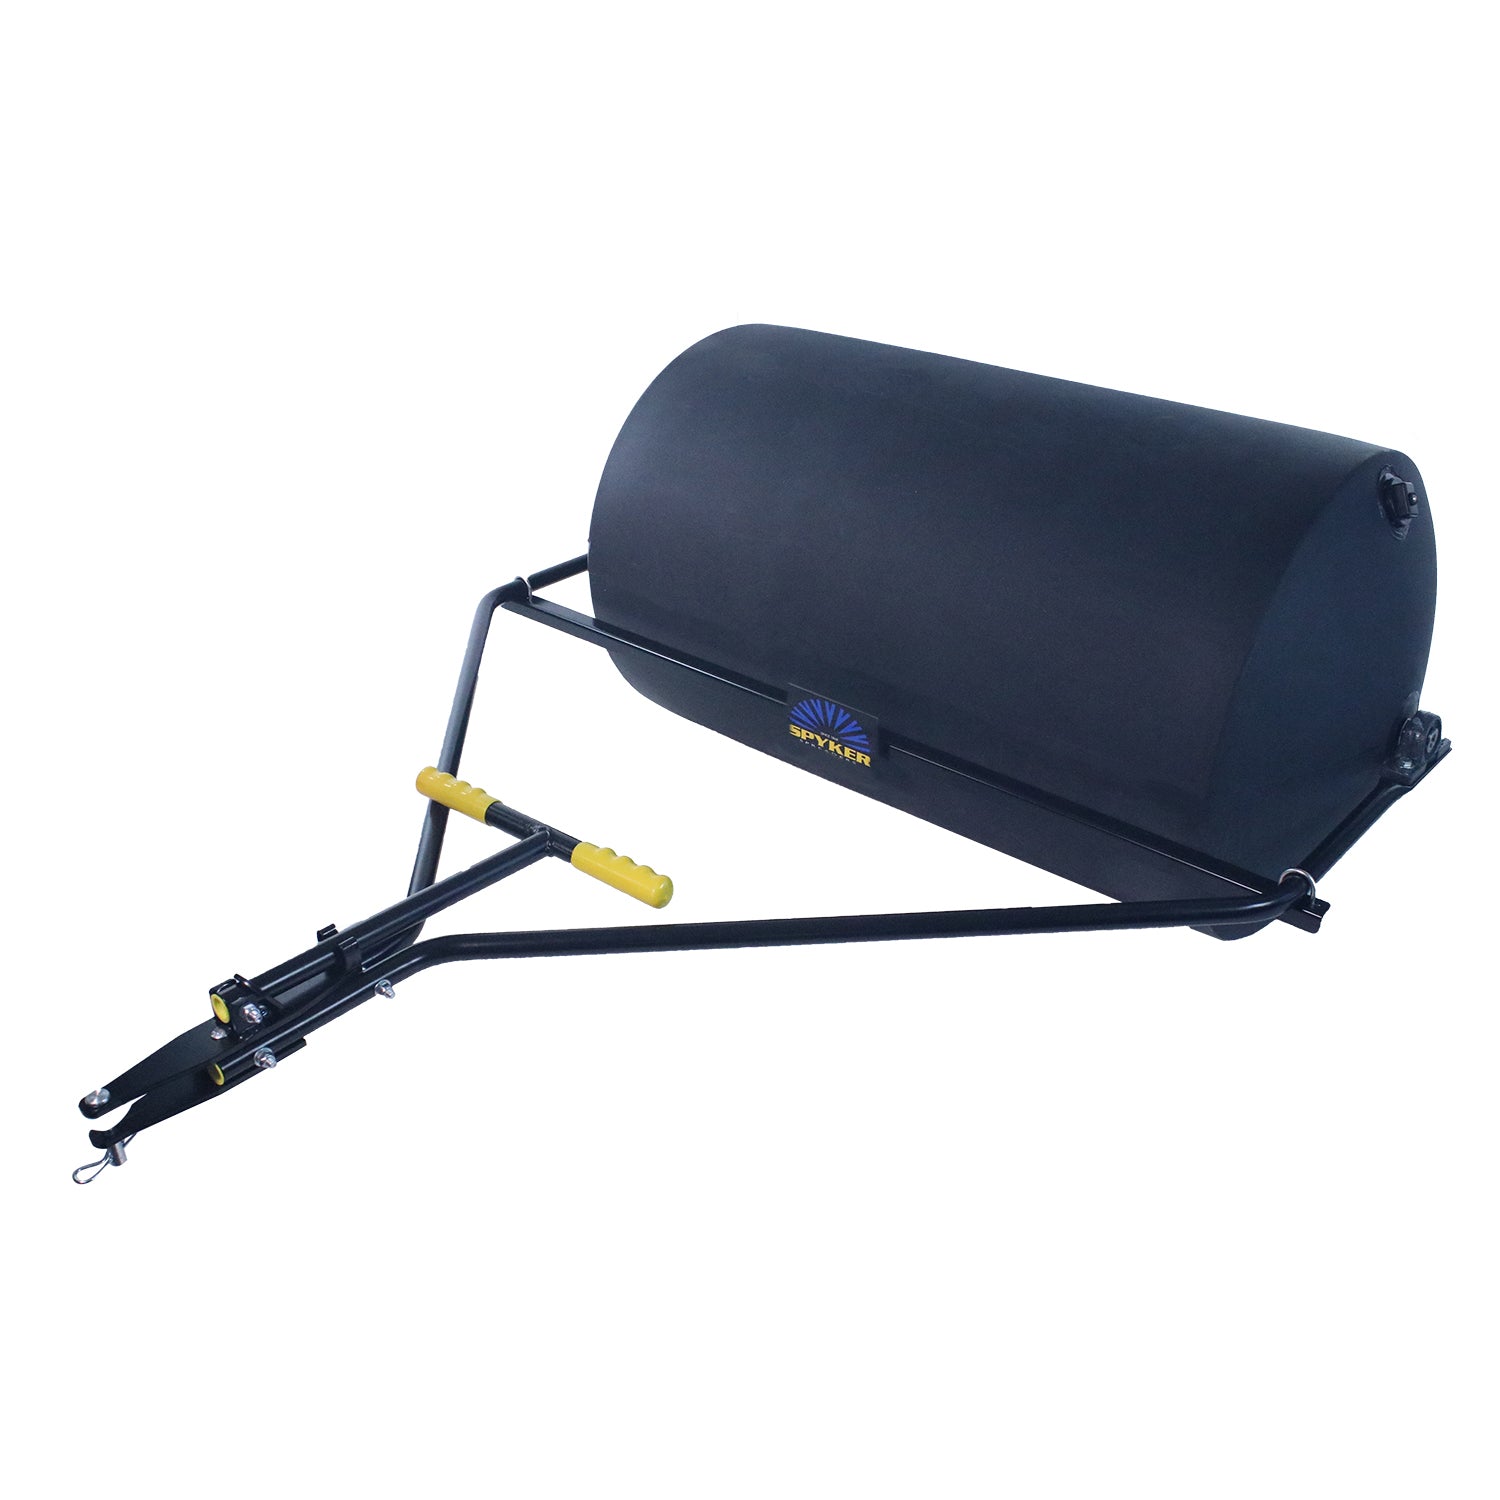 R76-2436 770# COMMERCIAL TOW-BEHIND LAWN ROLLER, 24" x 36"